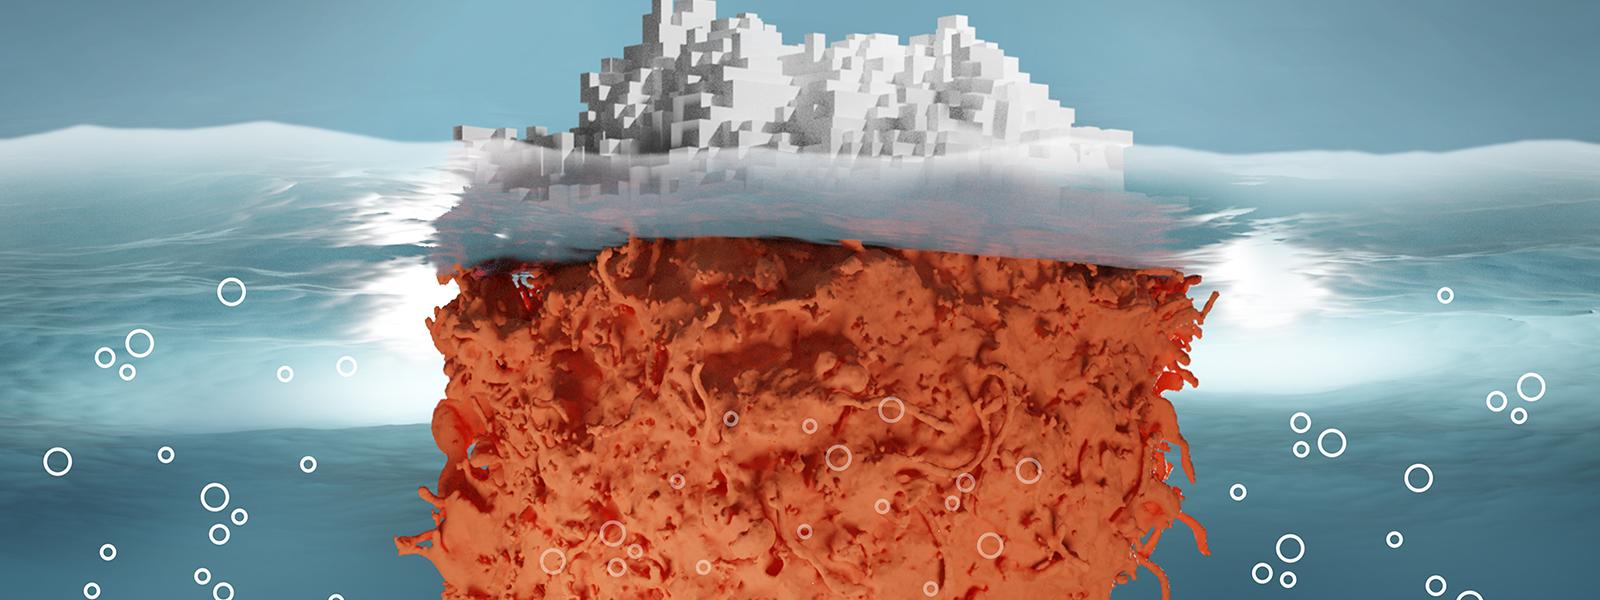 A graphic illustration representing the idiom the tip of the iceberg